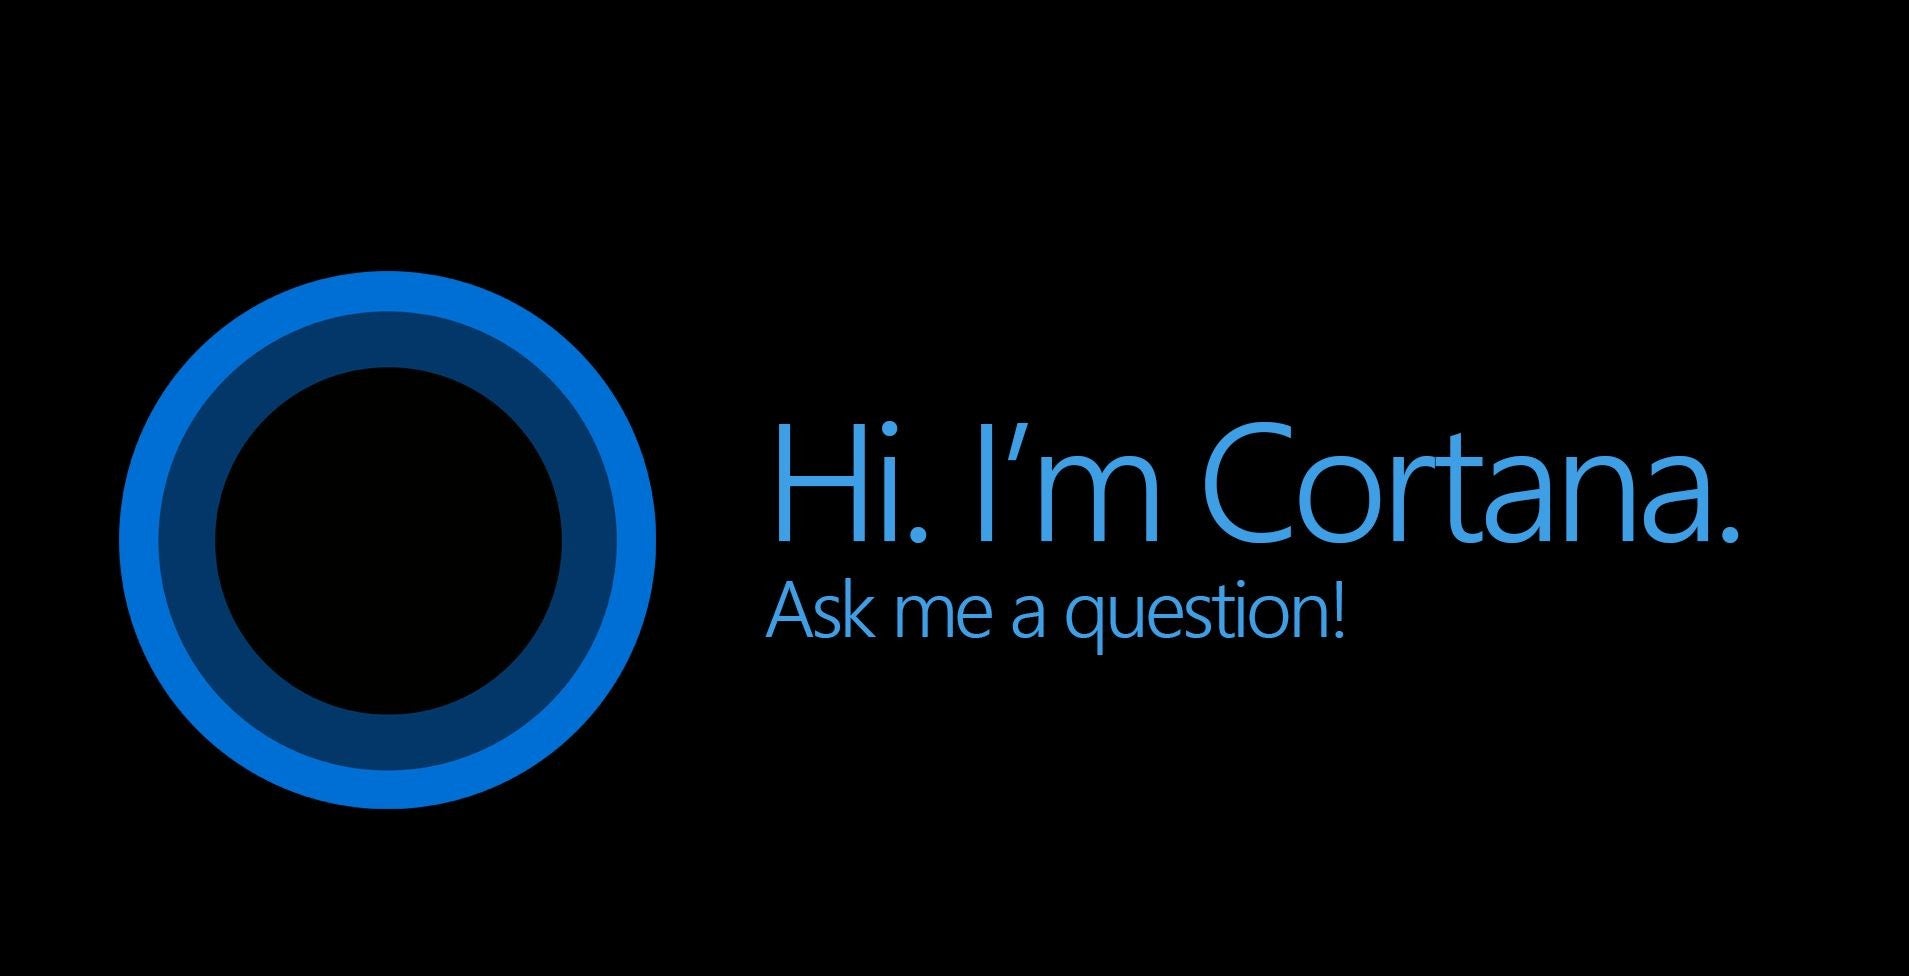 Microsoft launches Cortana in the UK with refreshed design, performance improvements